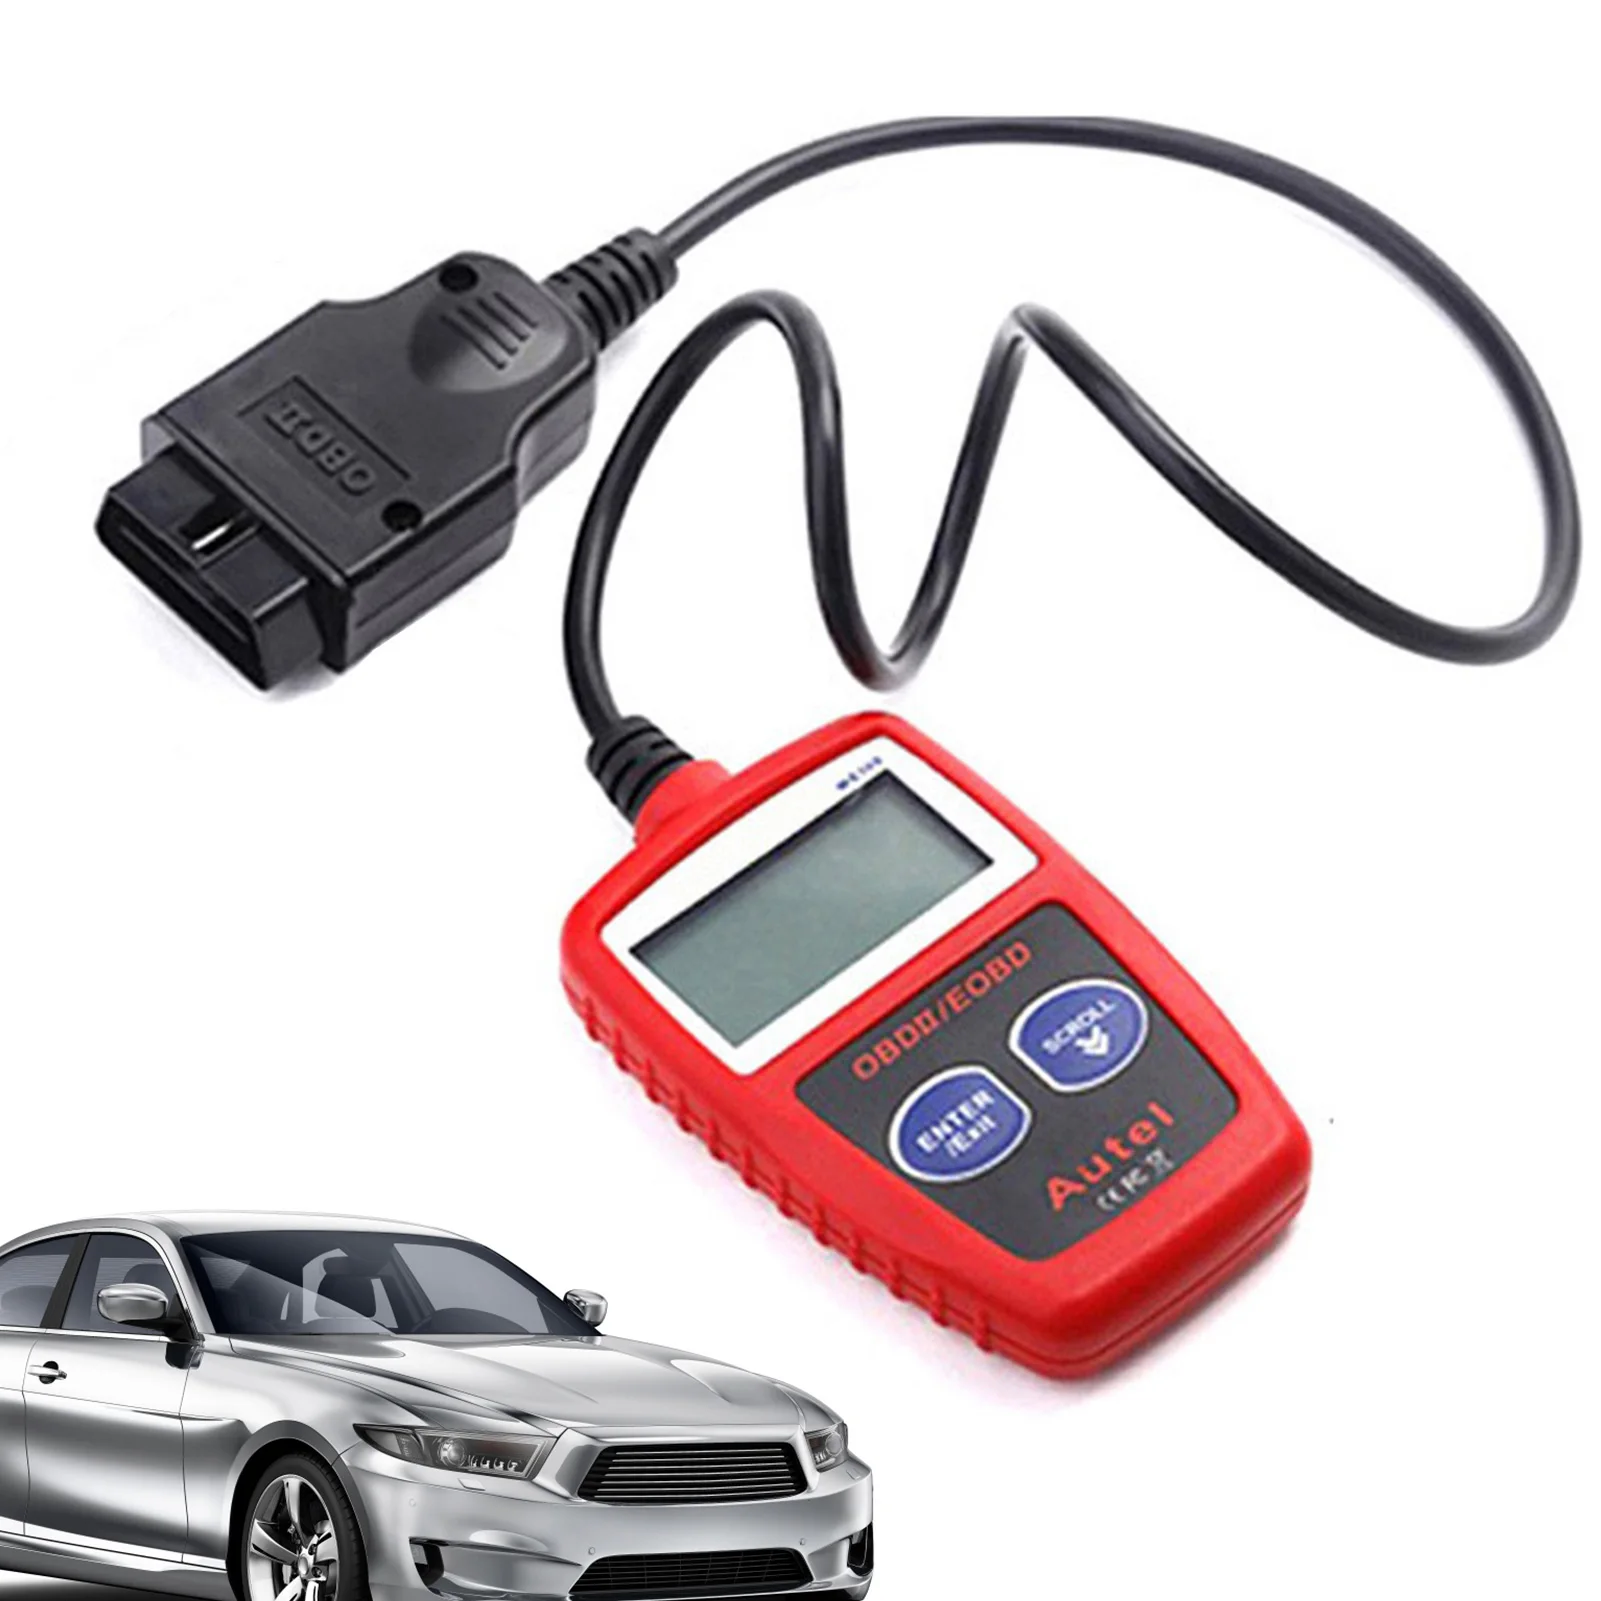 

MS309 OBD2 Scanner Car Diagnostic Scan Tools Check Emission Monitor Status CAN-BUS Diagnostic Scan Tool for All OBD II Protocol